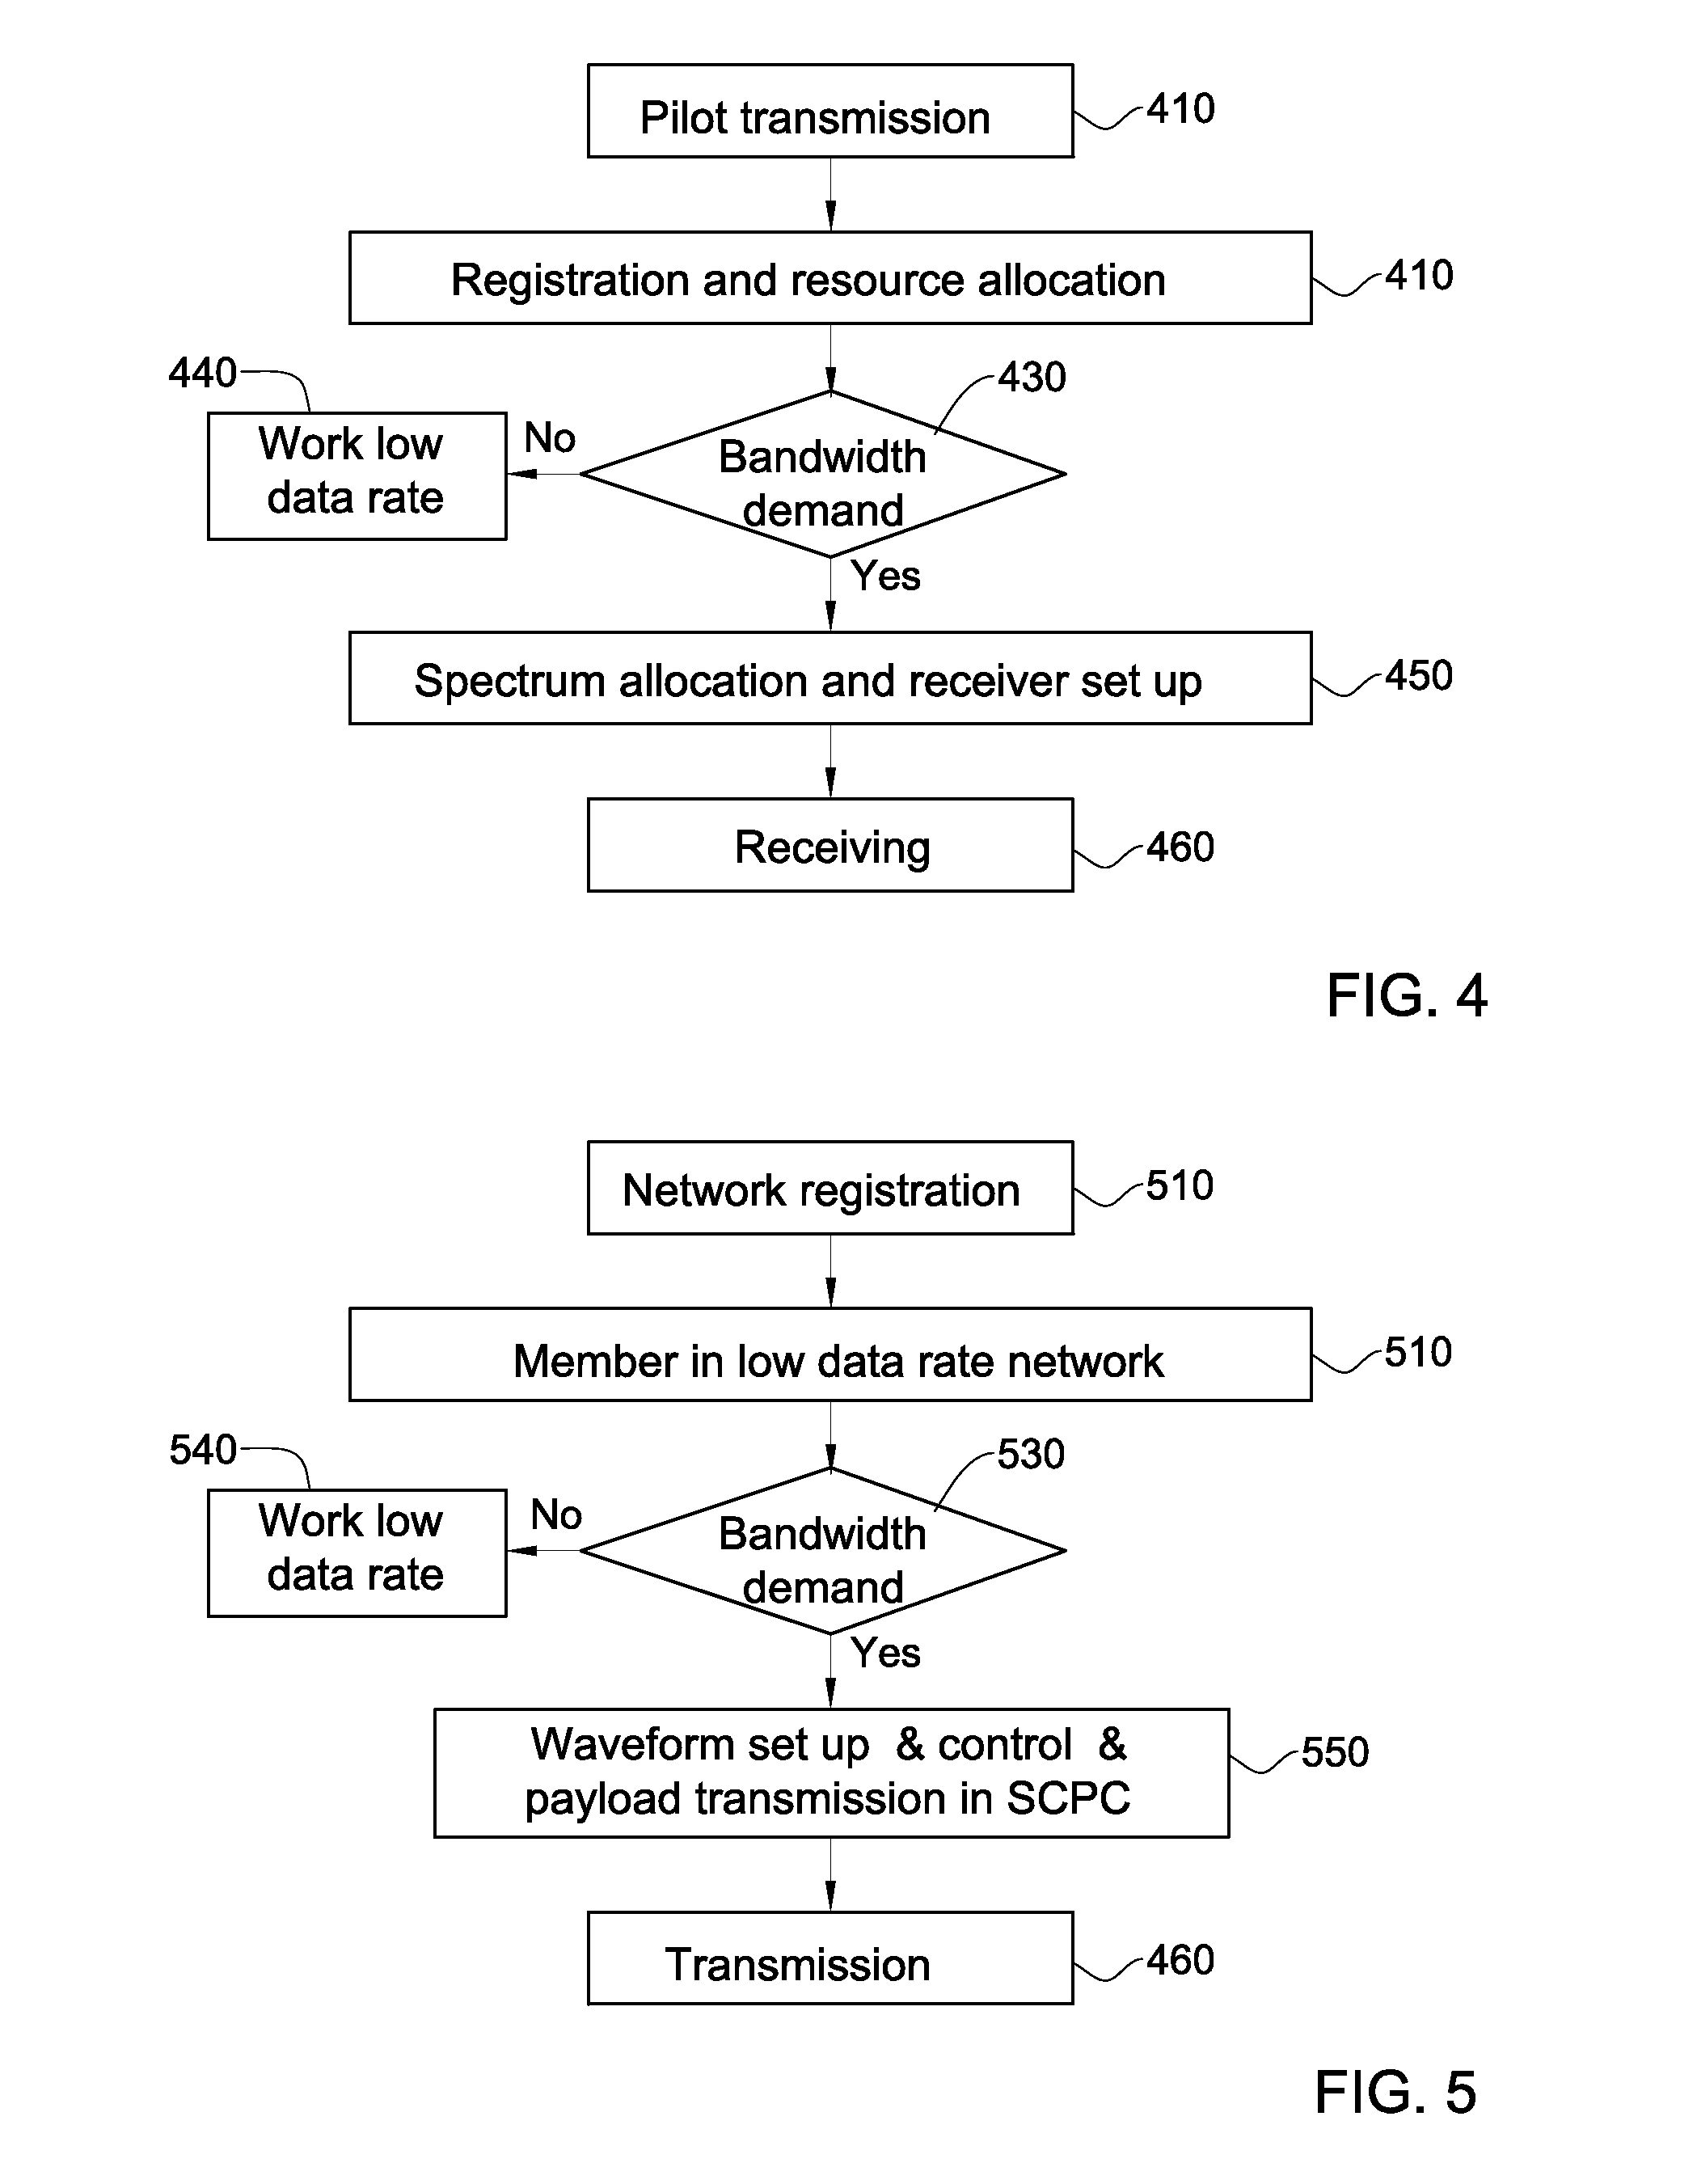 Apparatus and methods for dynamic spectrum allocation in satellite communications